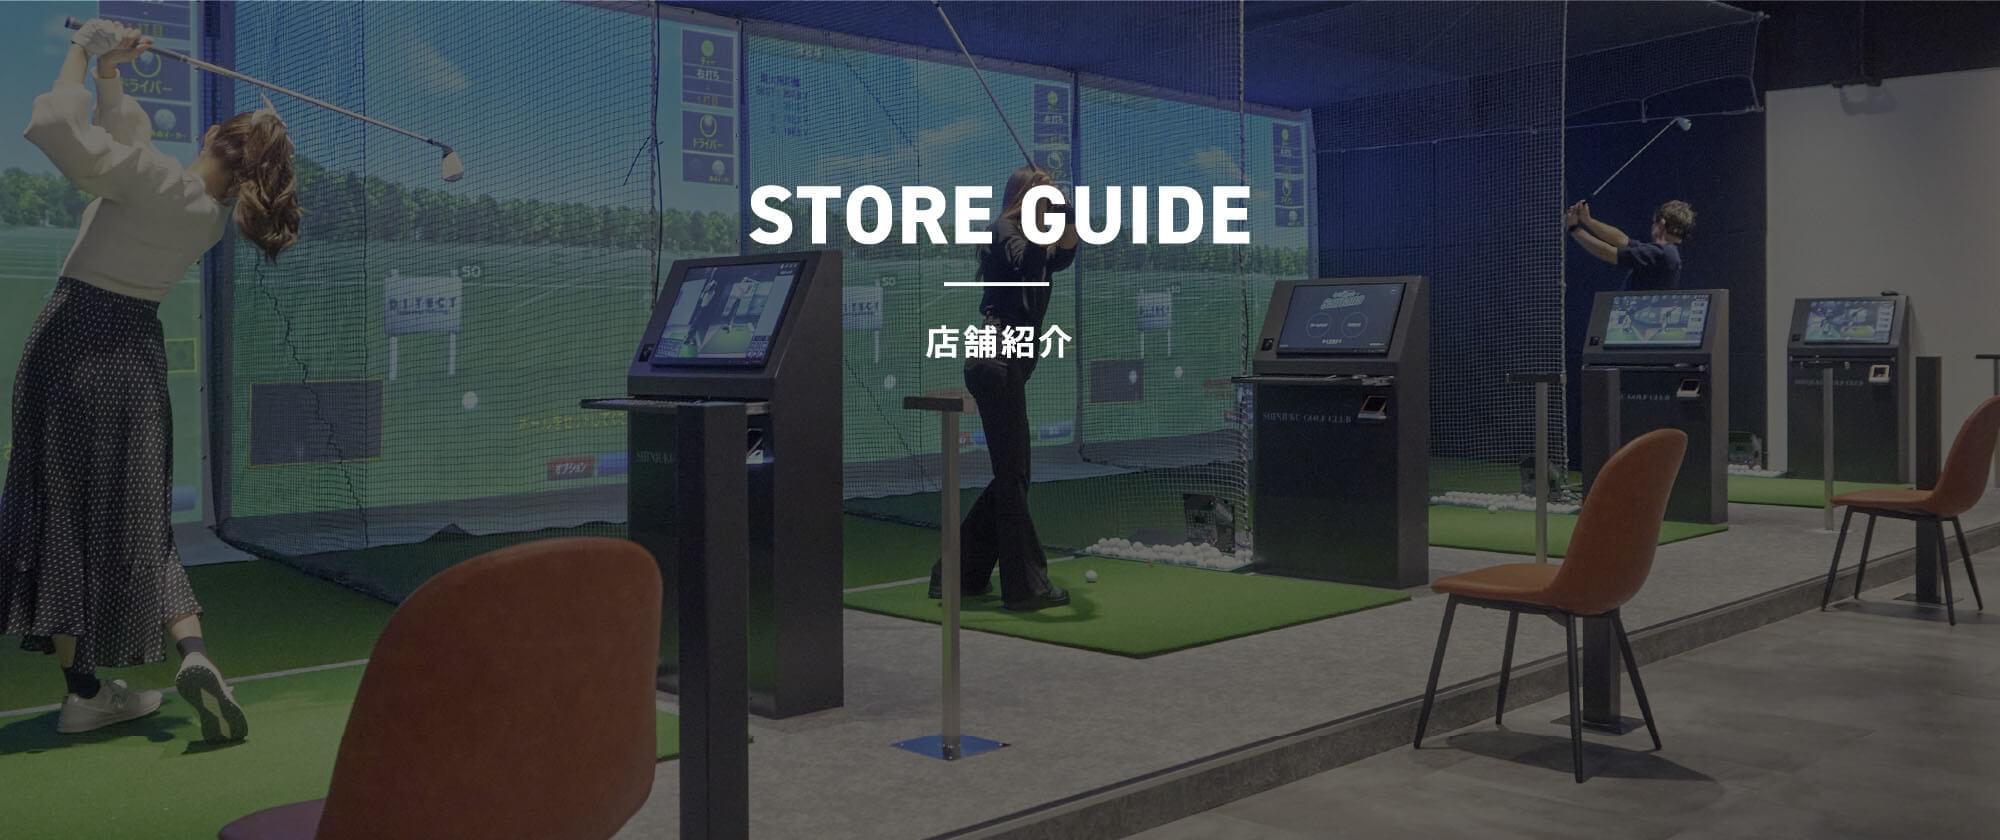 STORE GUIDE 店舗紹介